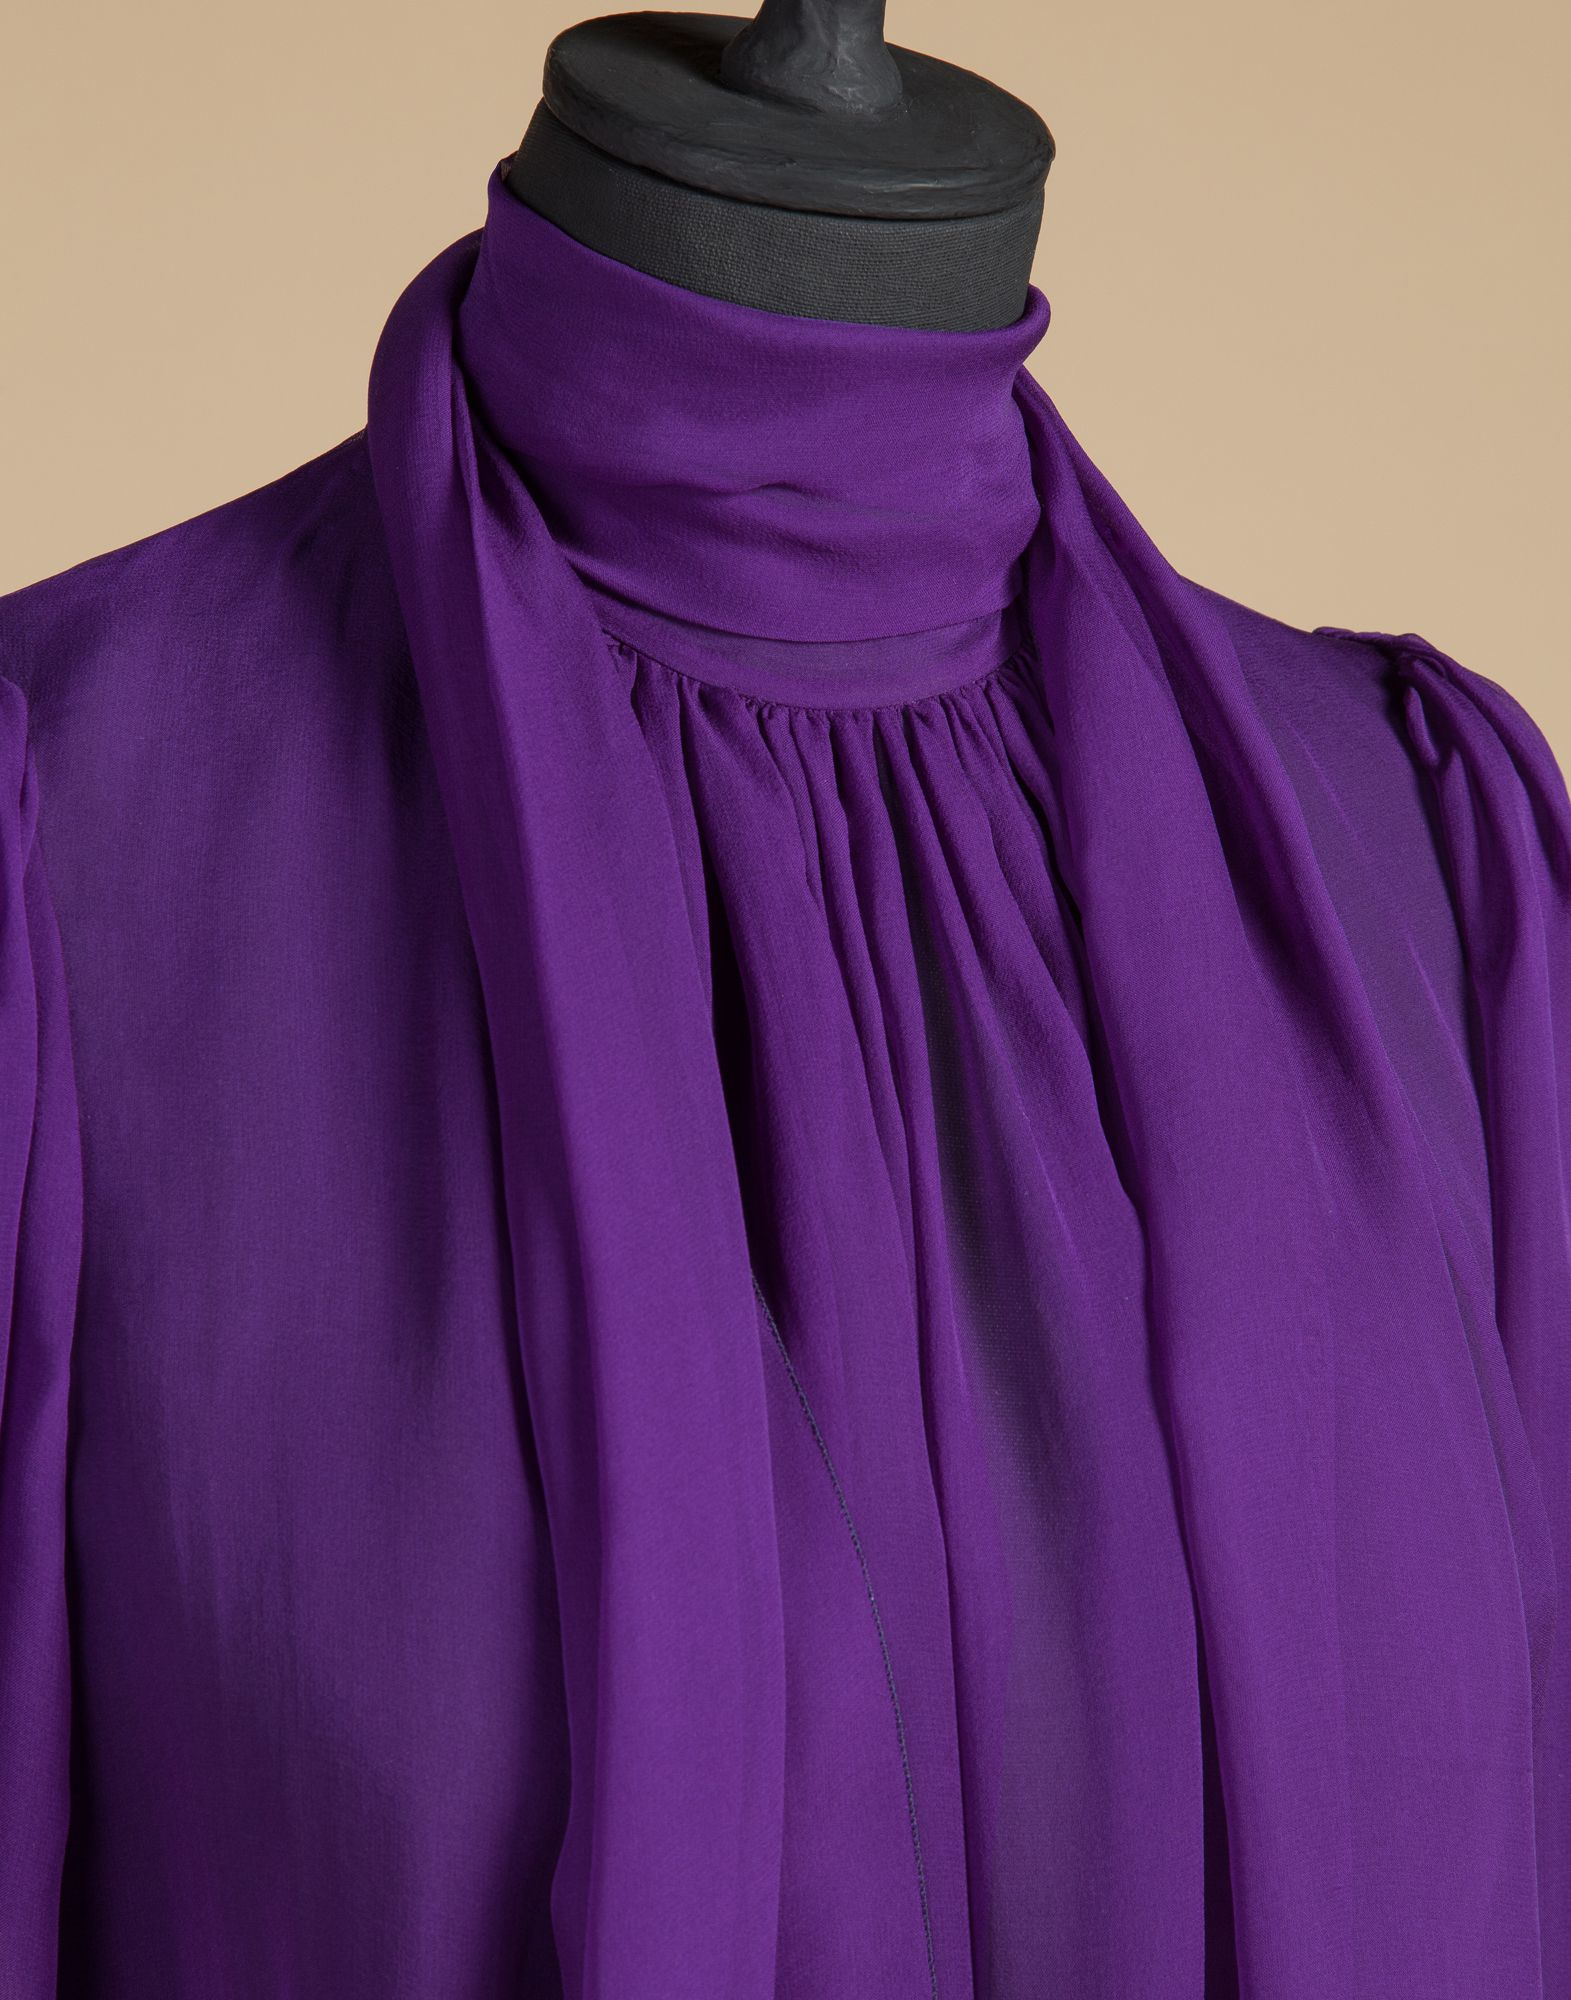 Lyst - Dolce & Gabbana Blouse In Silk Chiffon With Bow in Purple